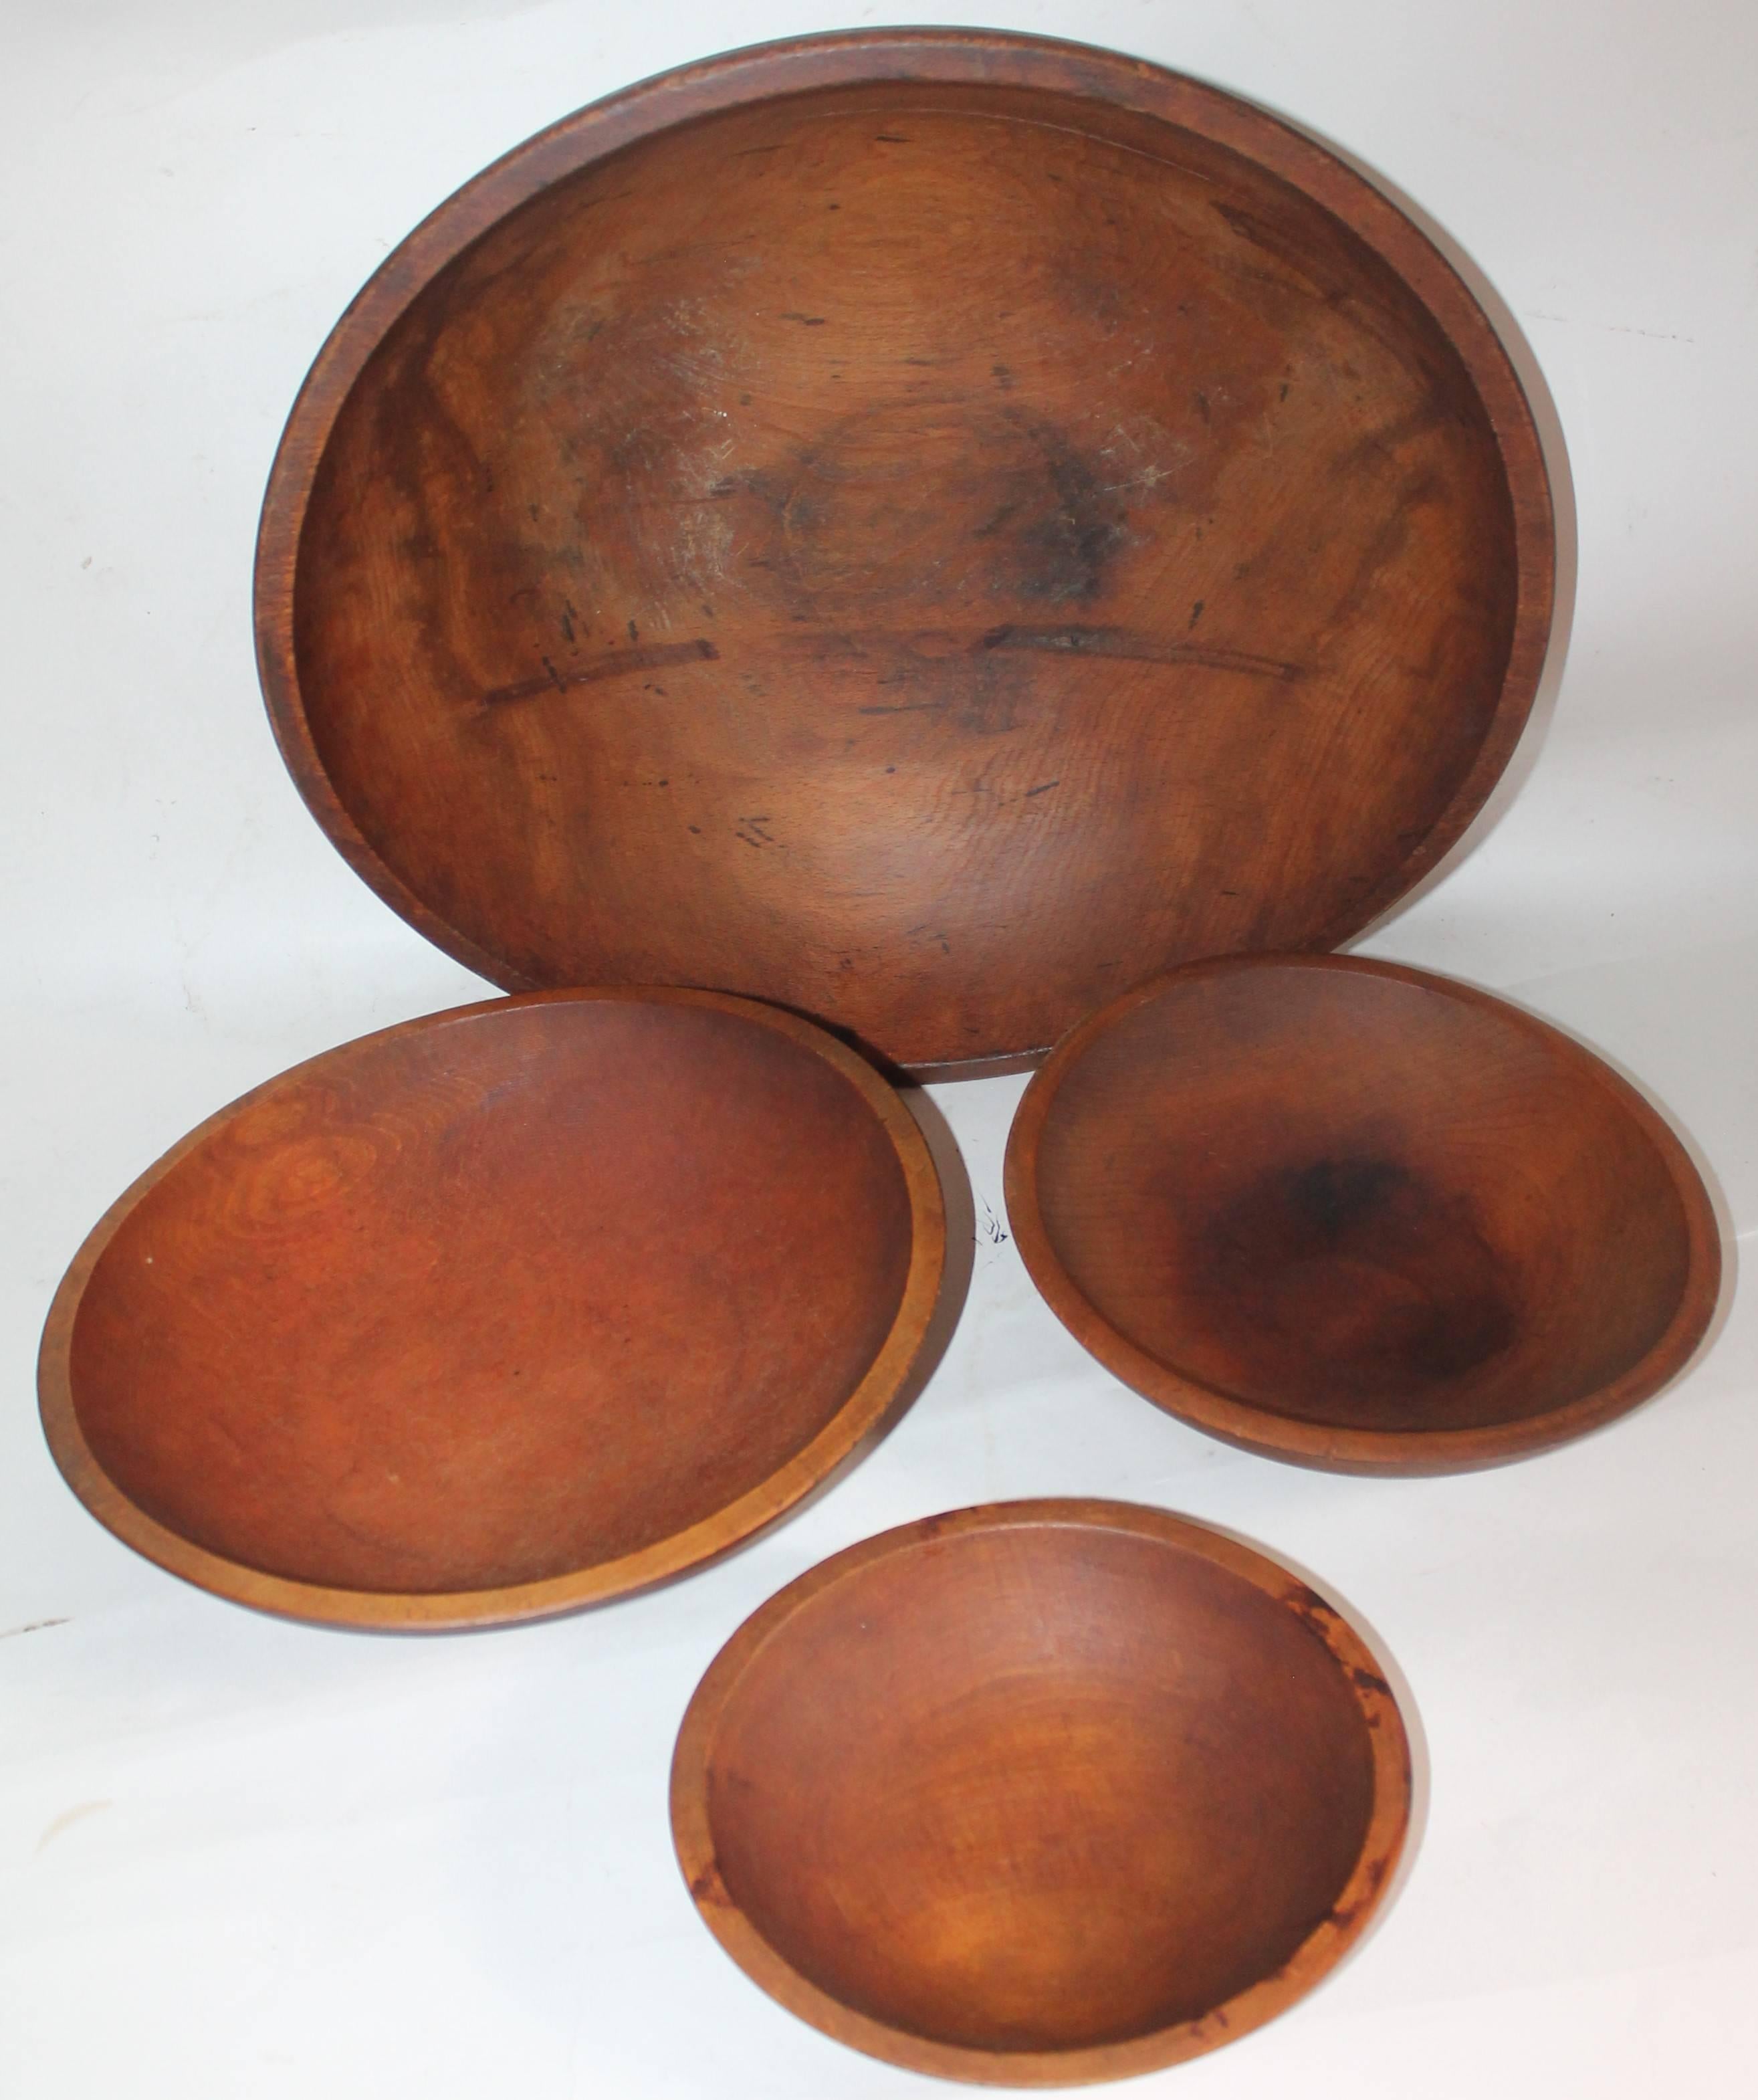 19th century collection of four 19th century large butter bowls. Measure-
18 inches in diameter by 5.5 inches in height

Medium bowls measure -
12 inches in diameter by 3.5 inches in height 
10 inches in diameter by 2.5 inches in